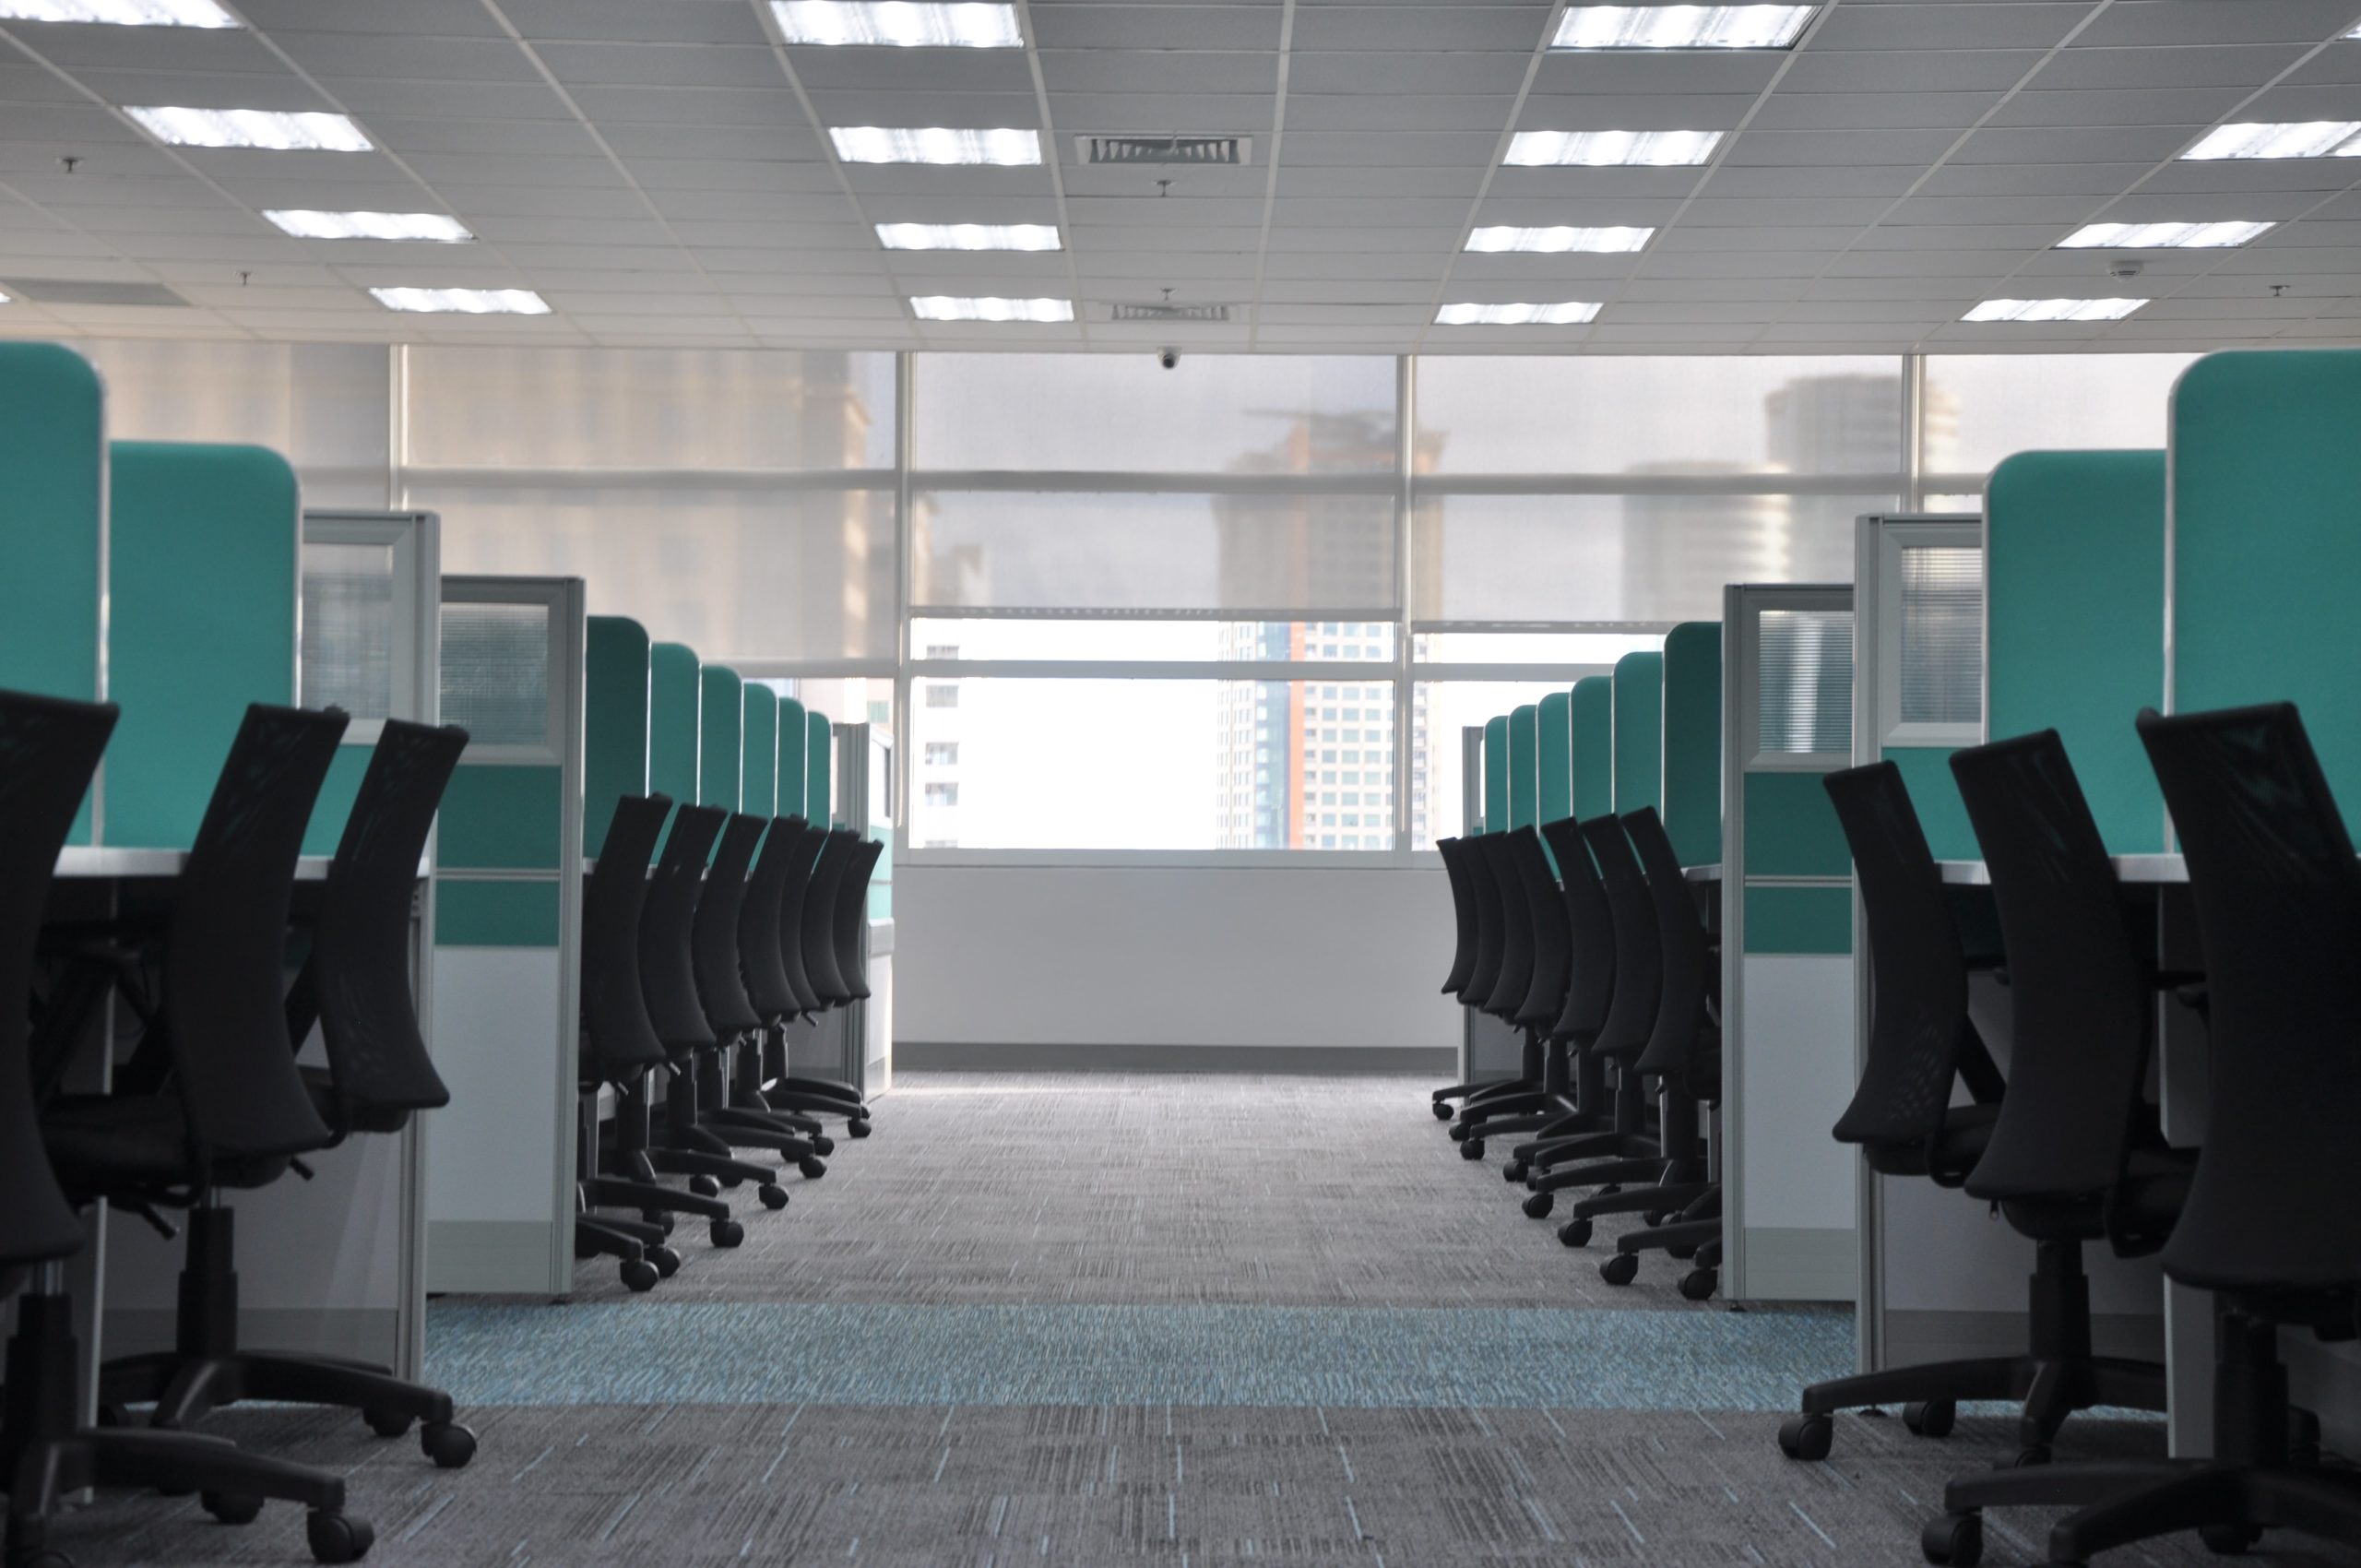 Office with rows of cubicles